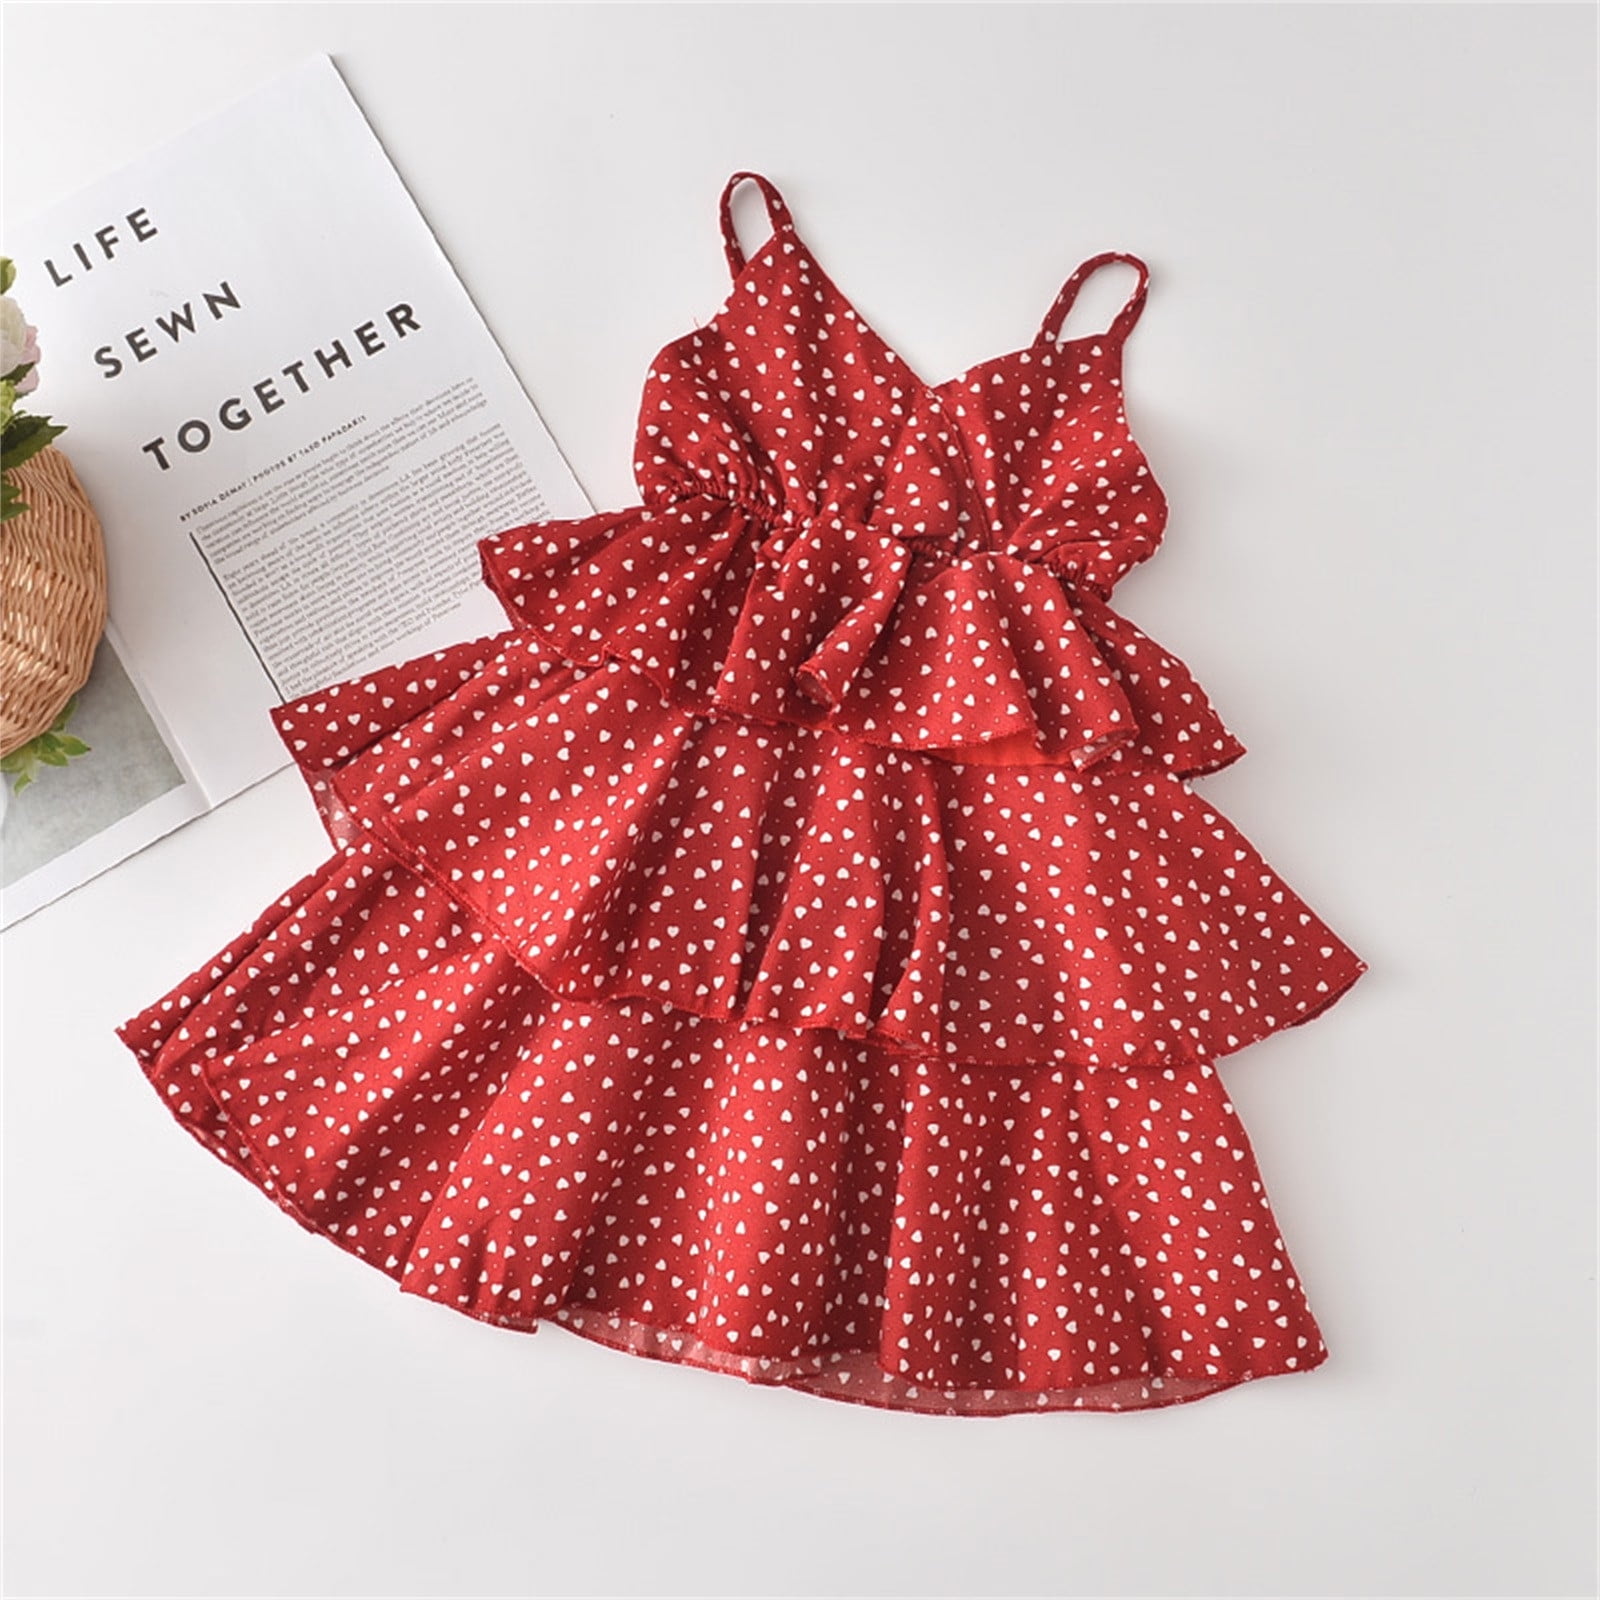 Toddler Girls Clothes Sweater for Girls 10-12 Baby Heart Ruffled Party  Print Kids Layered Toddler Clothes Neck Sleeveless 16 Beach V Elegant Dot  Toddler Girls Holiday Dresses Fall Dress Teenage Girls 